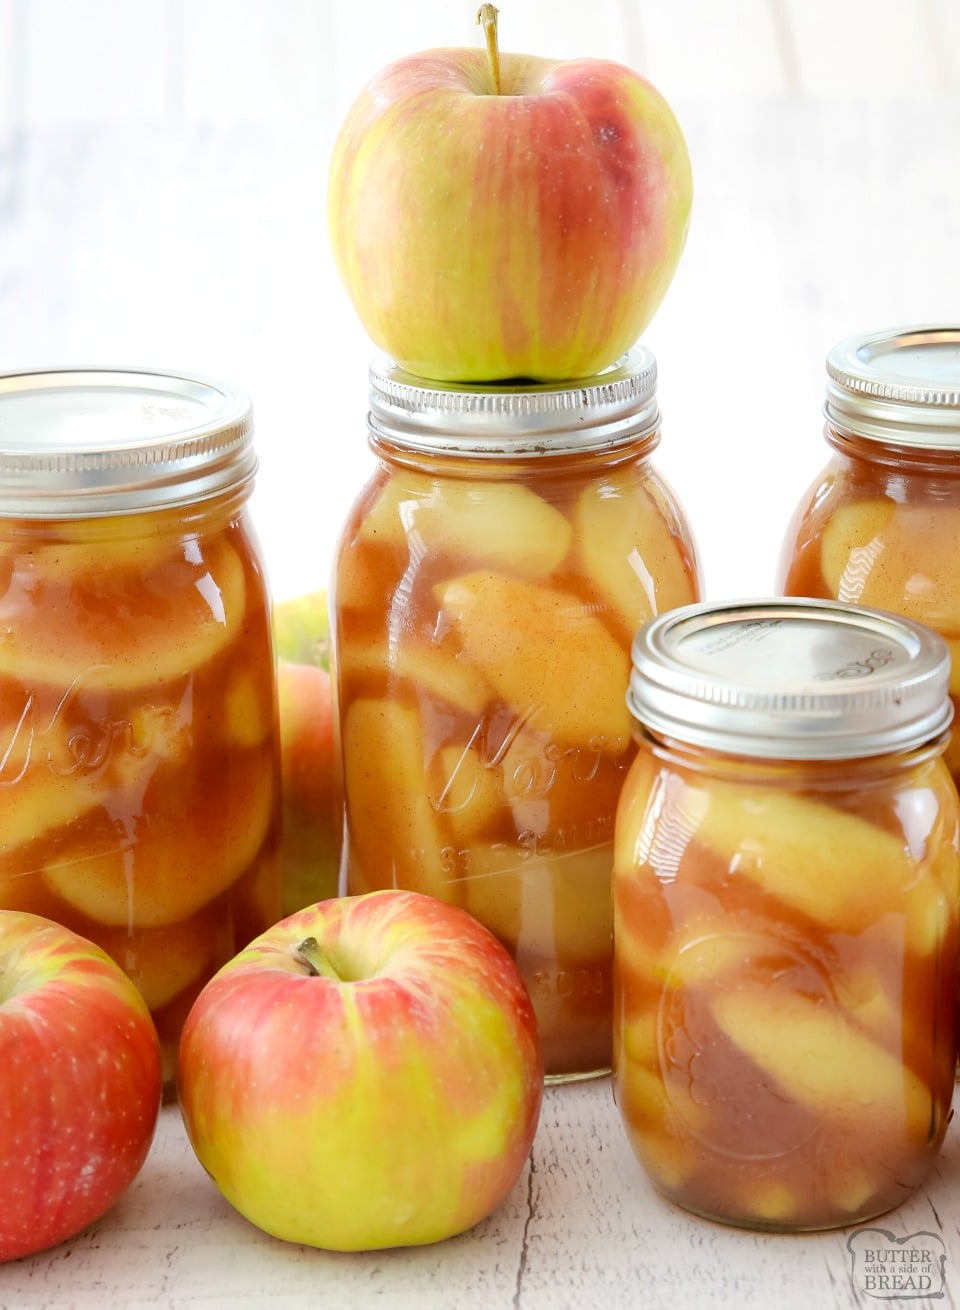 How to make apple pie filling